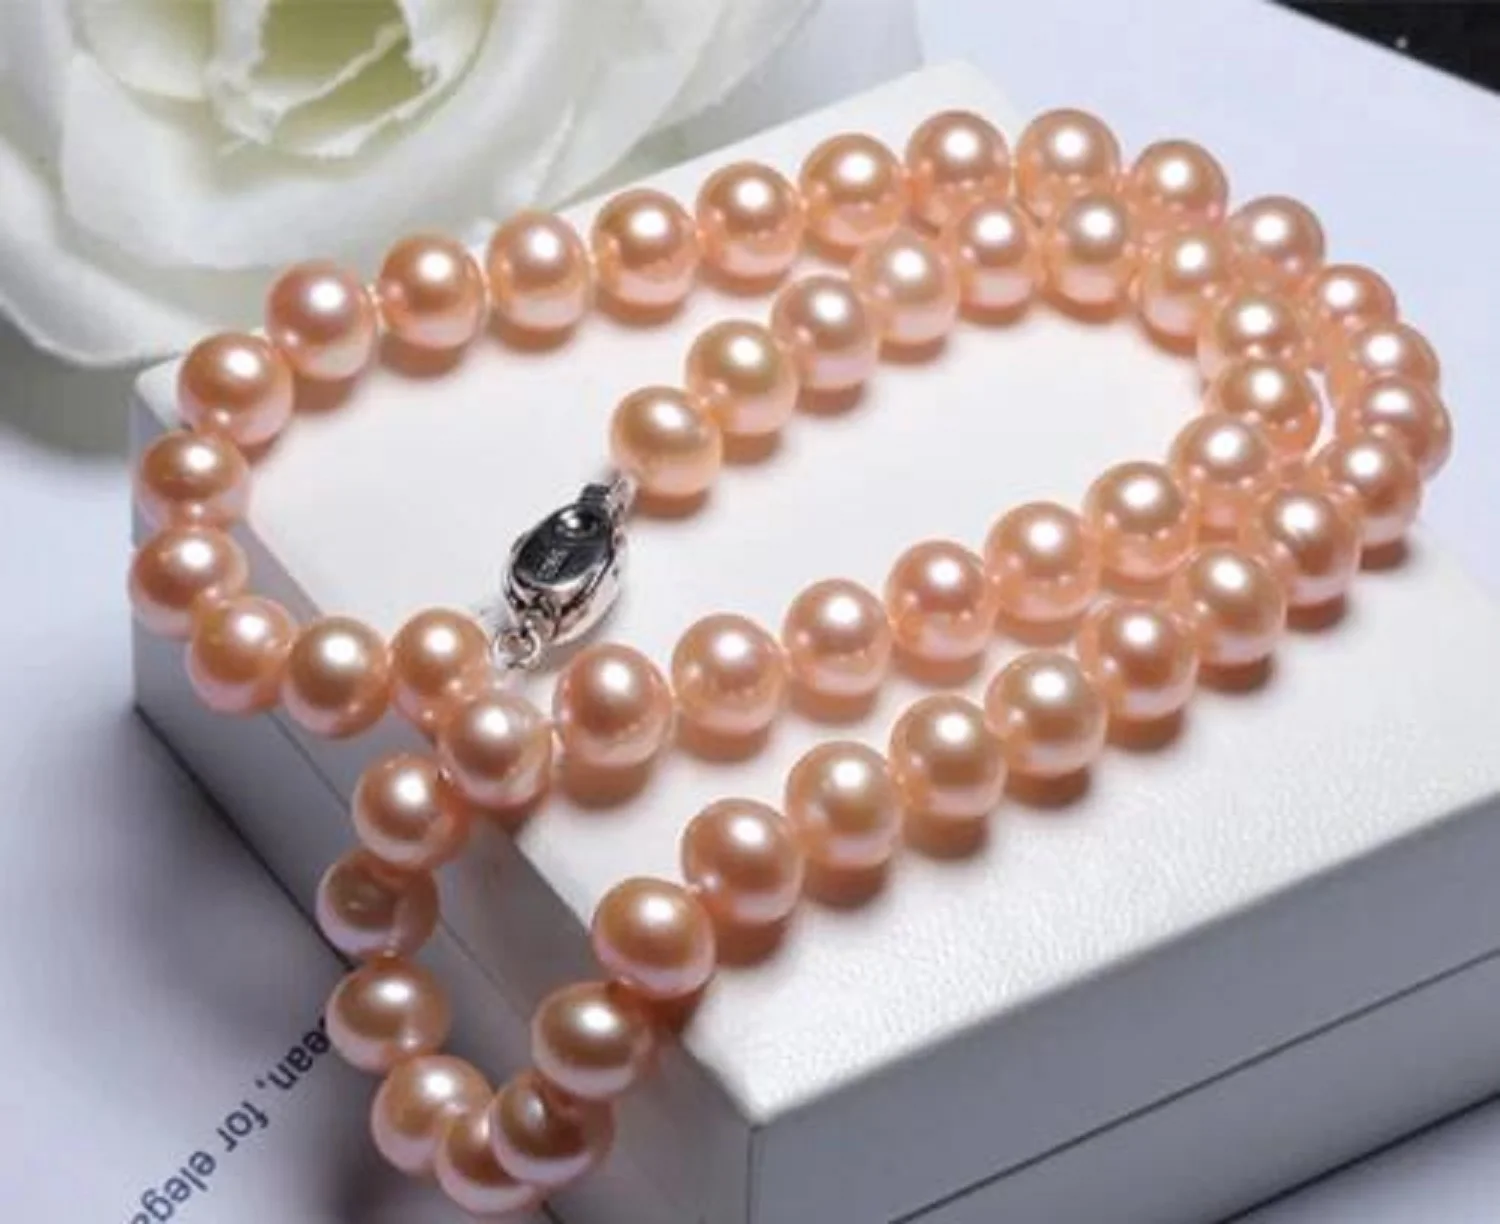 Hand knotted, sturdy Top Grading AAAA++ Gorgeous 9-10mm real natural south sea pink pearl necklace 16in 18 aaa 11 12 mm south sea natural white baroque pearl necklace 14k gold clasp